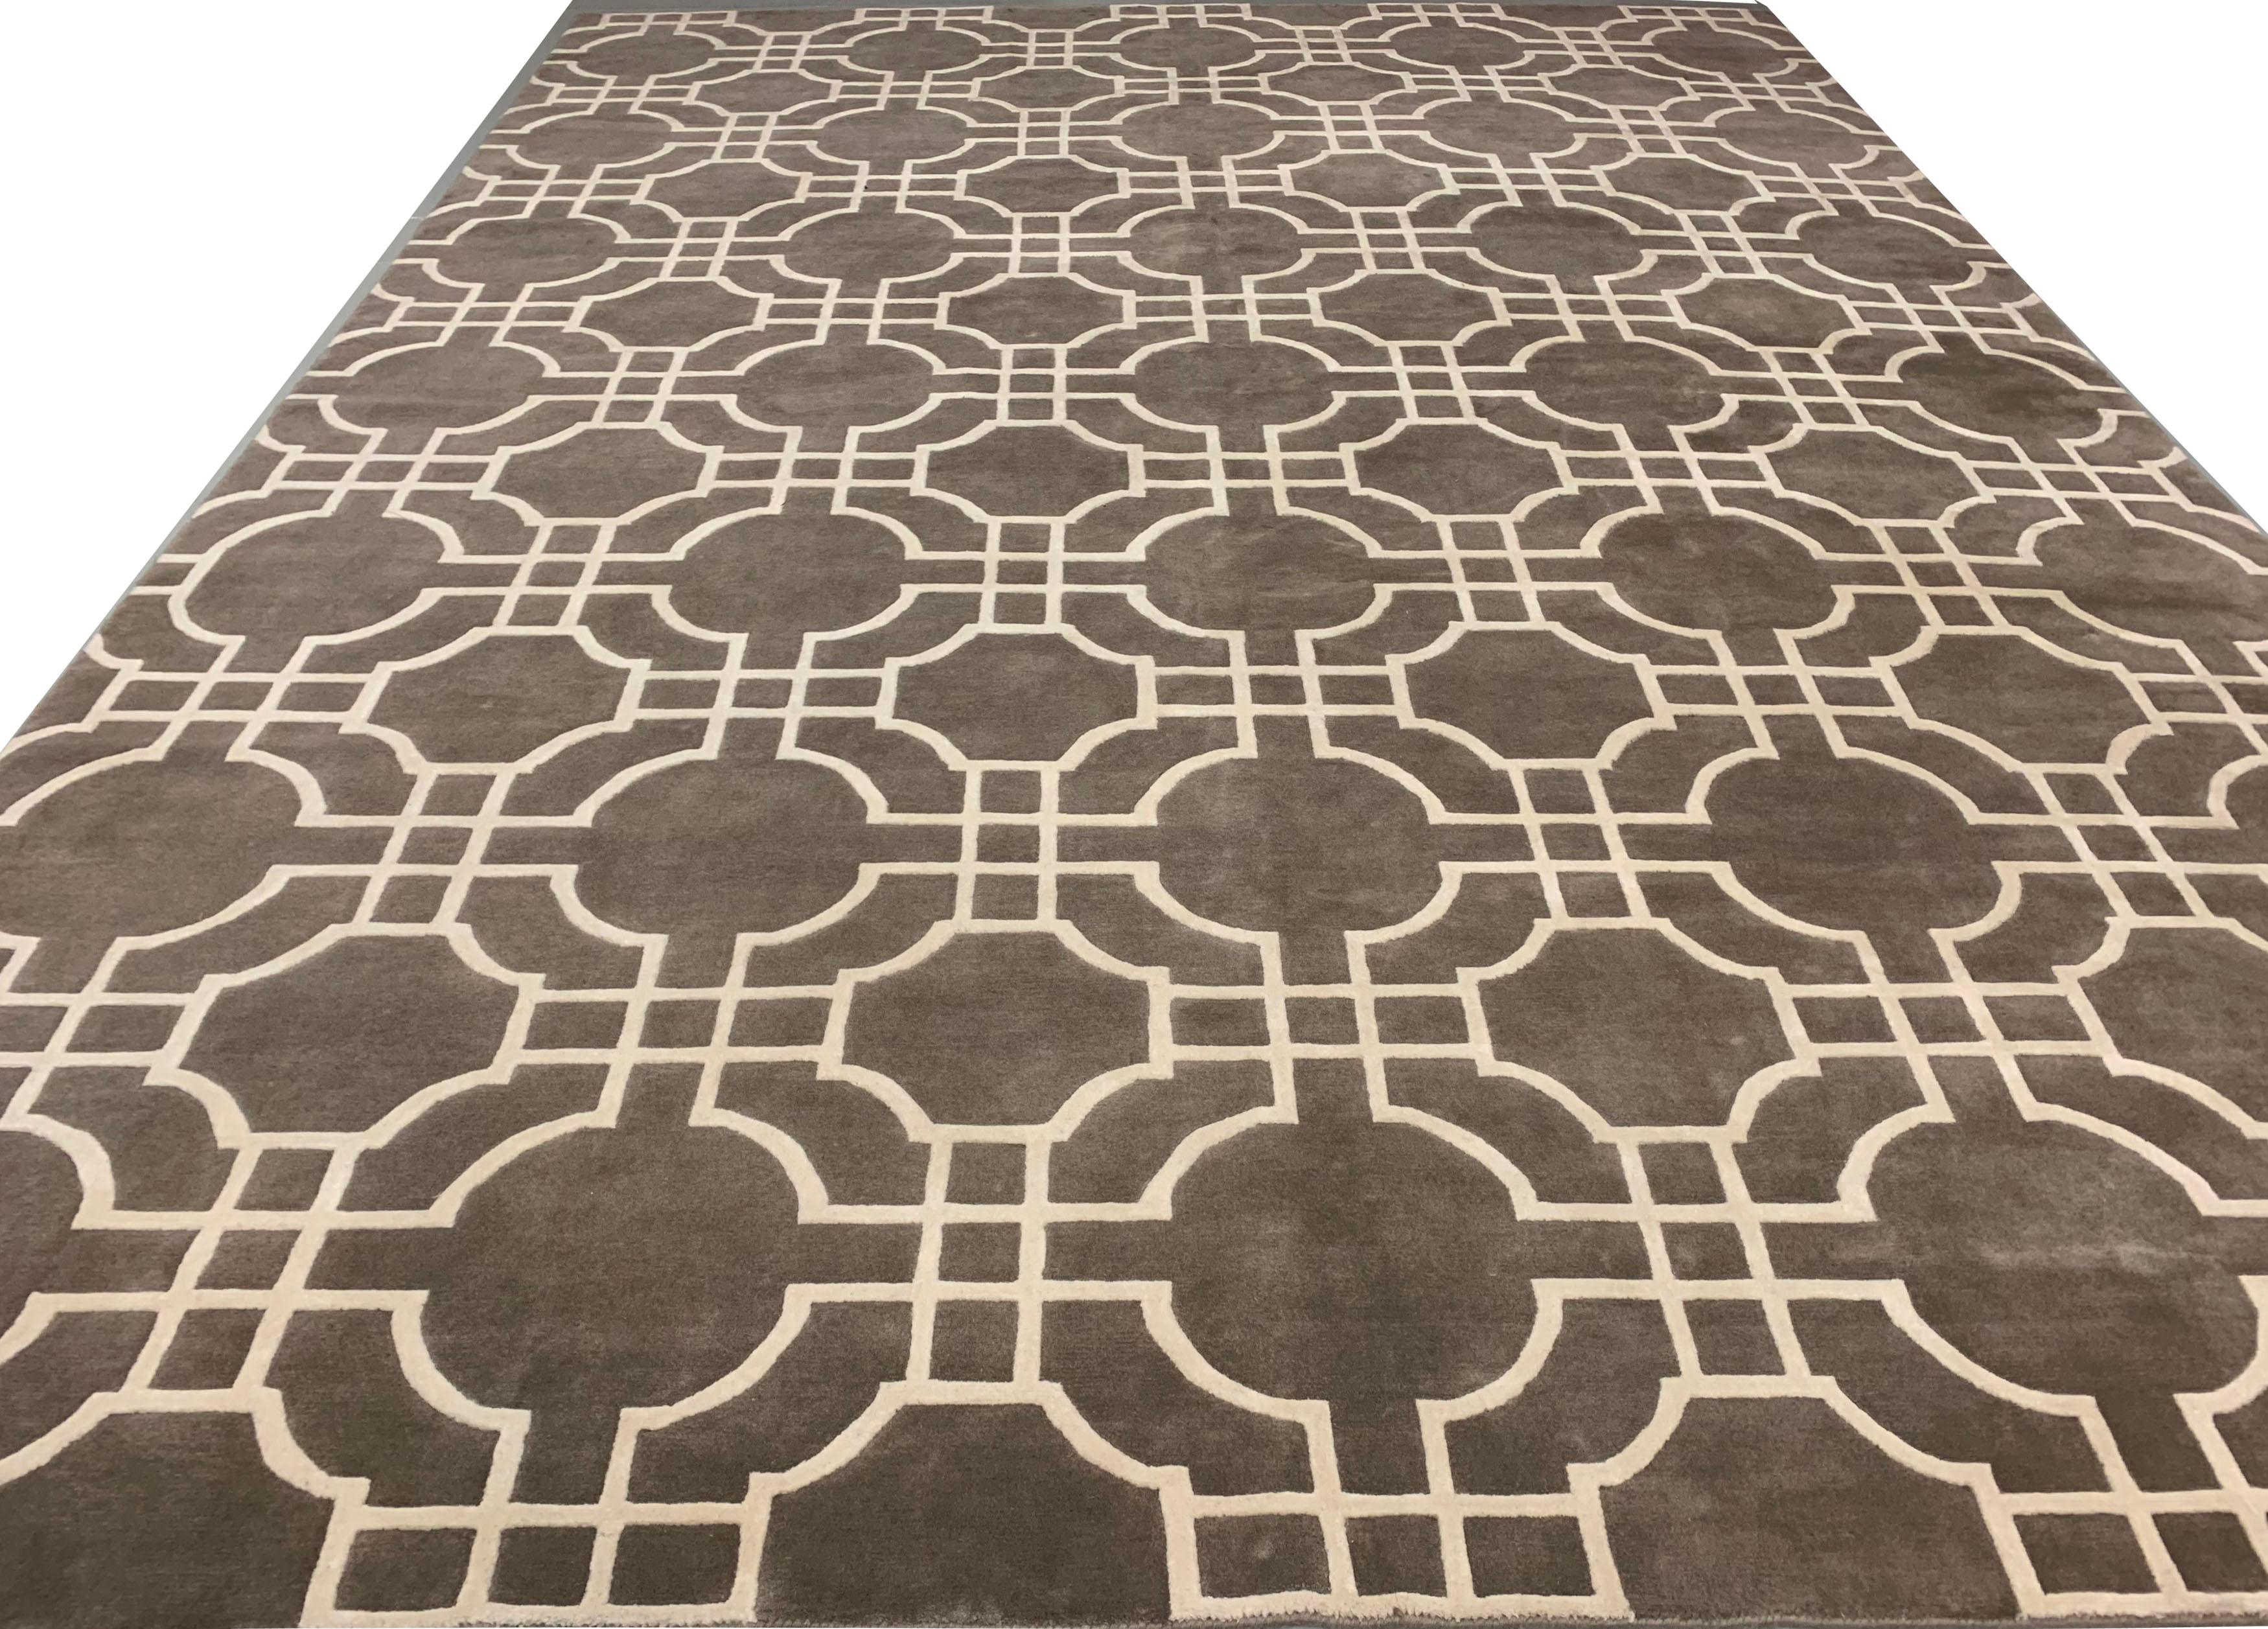 Olympic Collection Taupe cream rug 9' x 12'. A contemporary style hand knotted using a combination of wool and viscose that adds a soft silky sheen to the overall look.